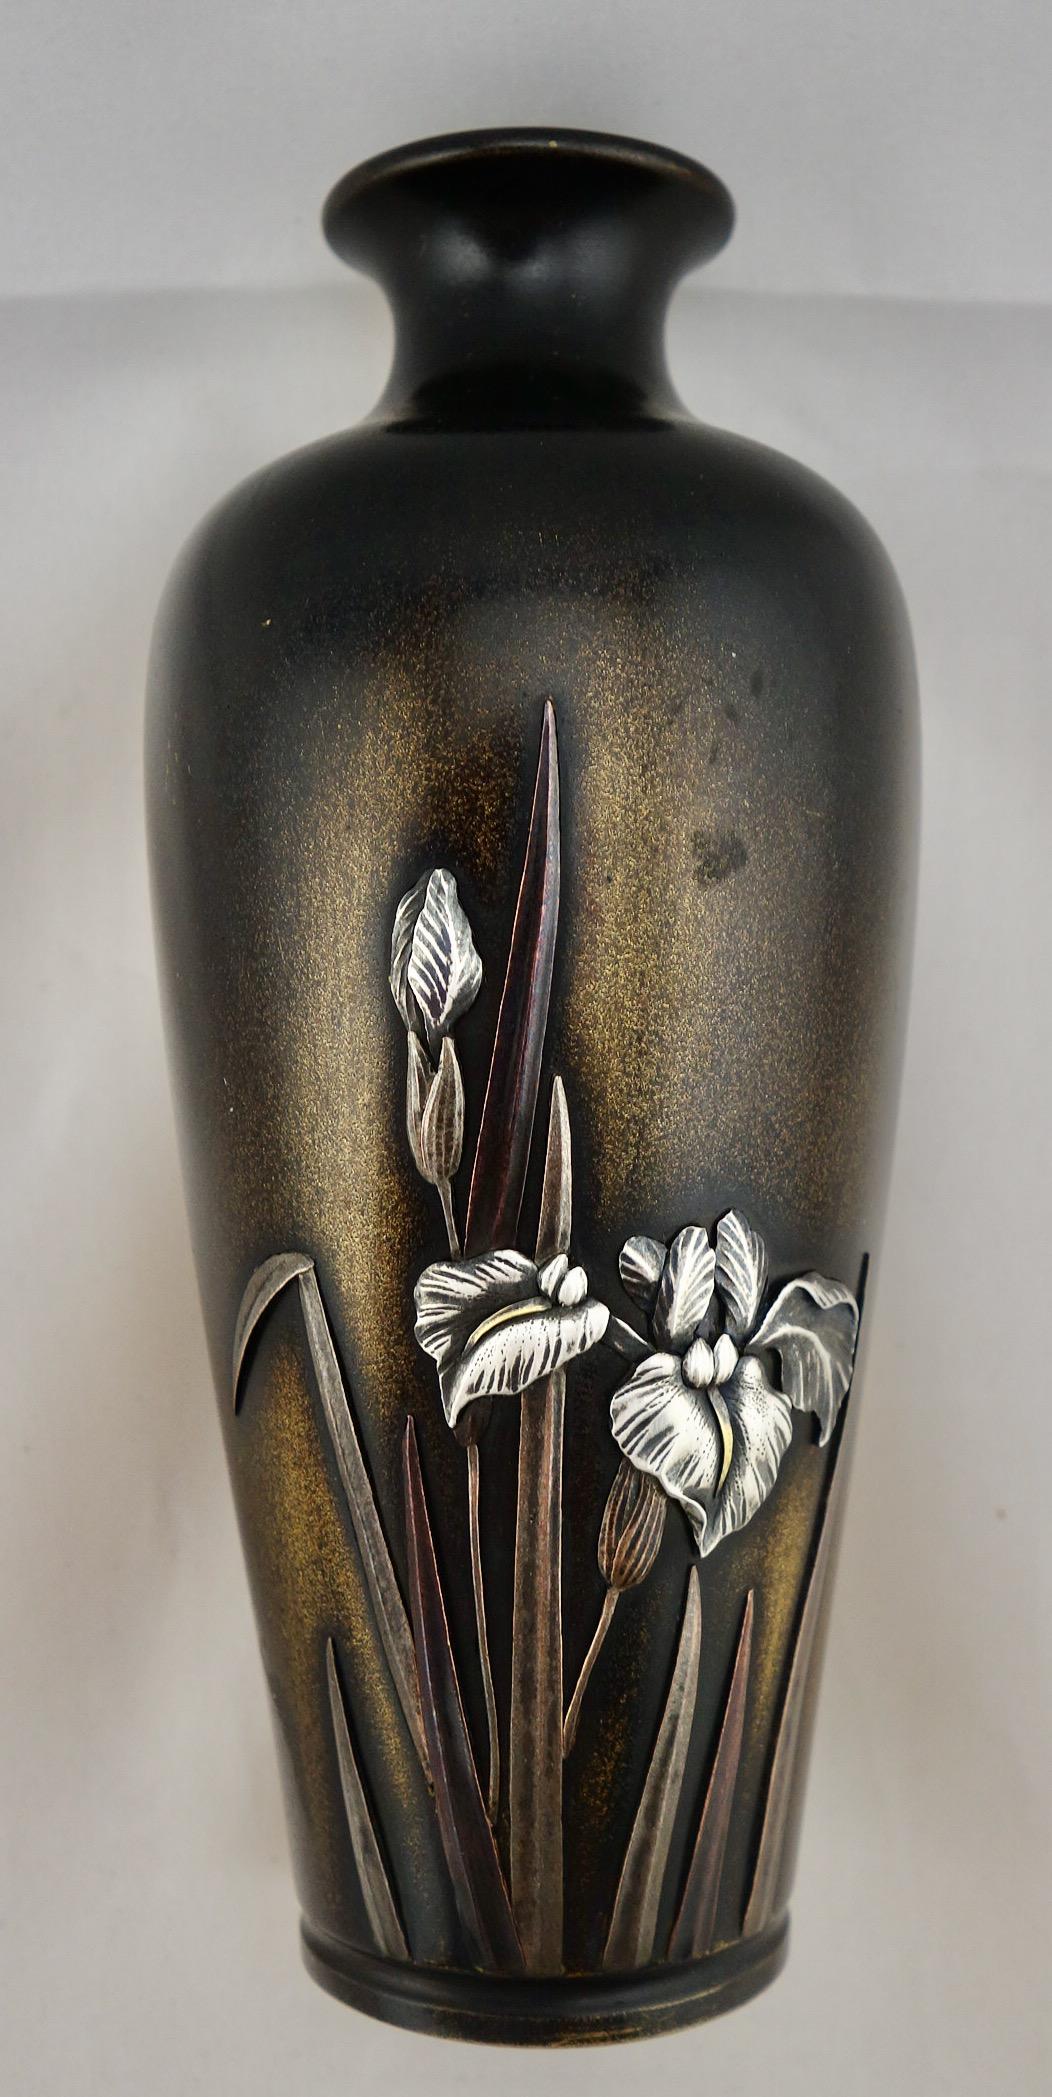 Japanese Mixed Metal Shakudo Vase Silver Irises on Bronze, Meiji Period  In Good Condition For Sale In Gainesville, FL